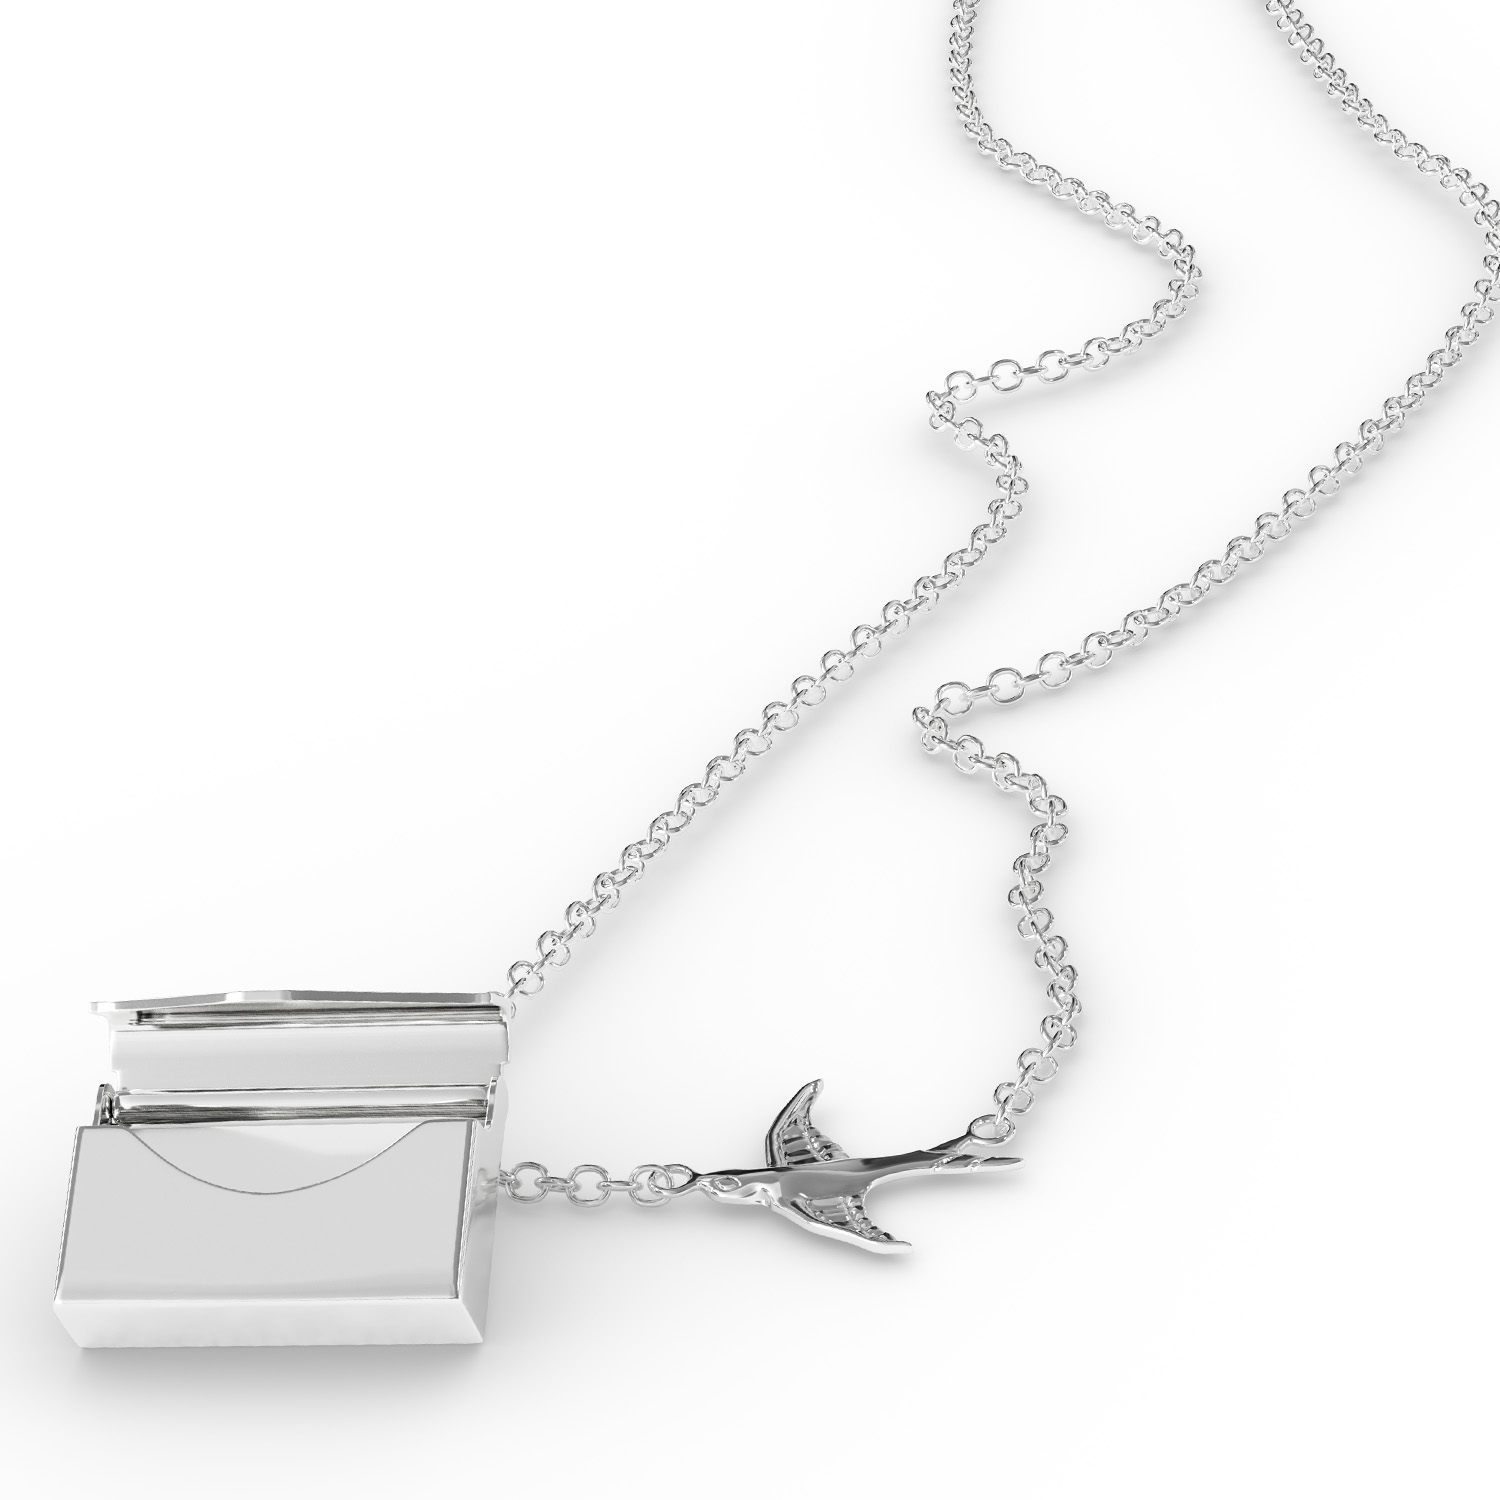 Locket Necklace Leo Star Constellation Zodiac Sign in a silver Envelope Neonblond - image 5 of 5